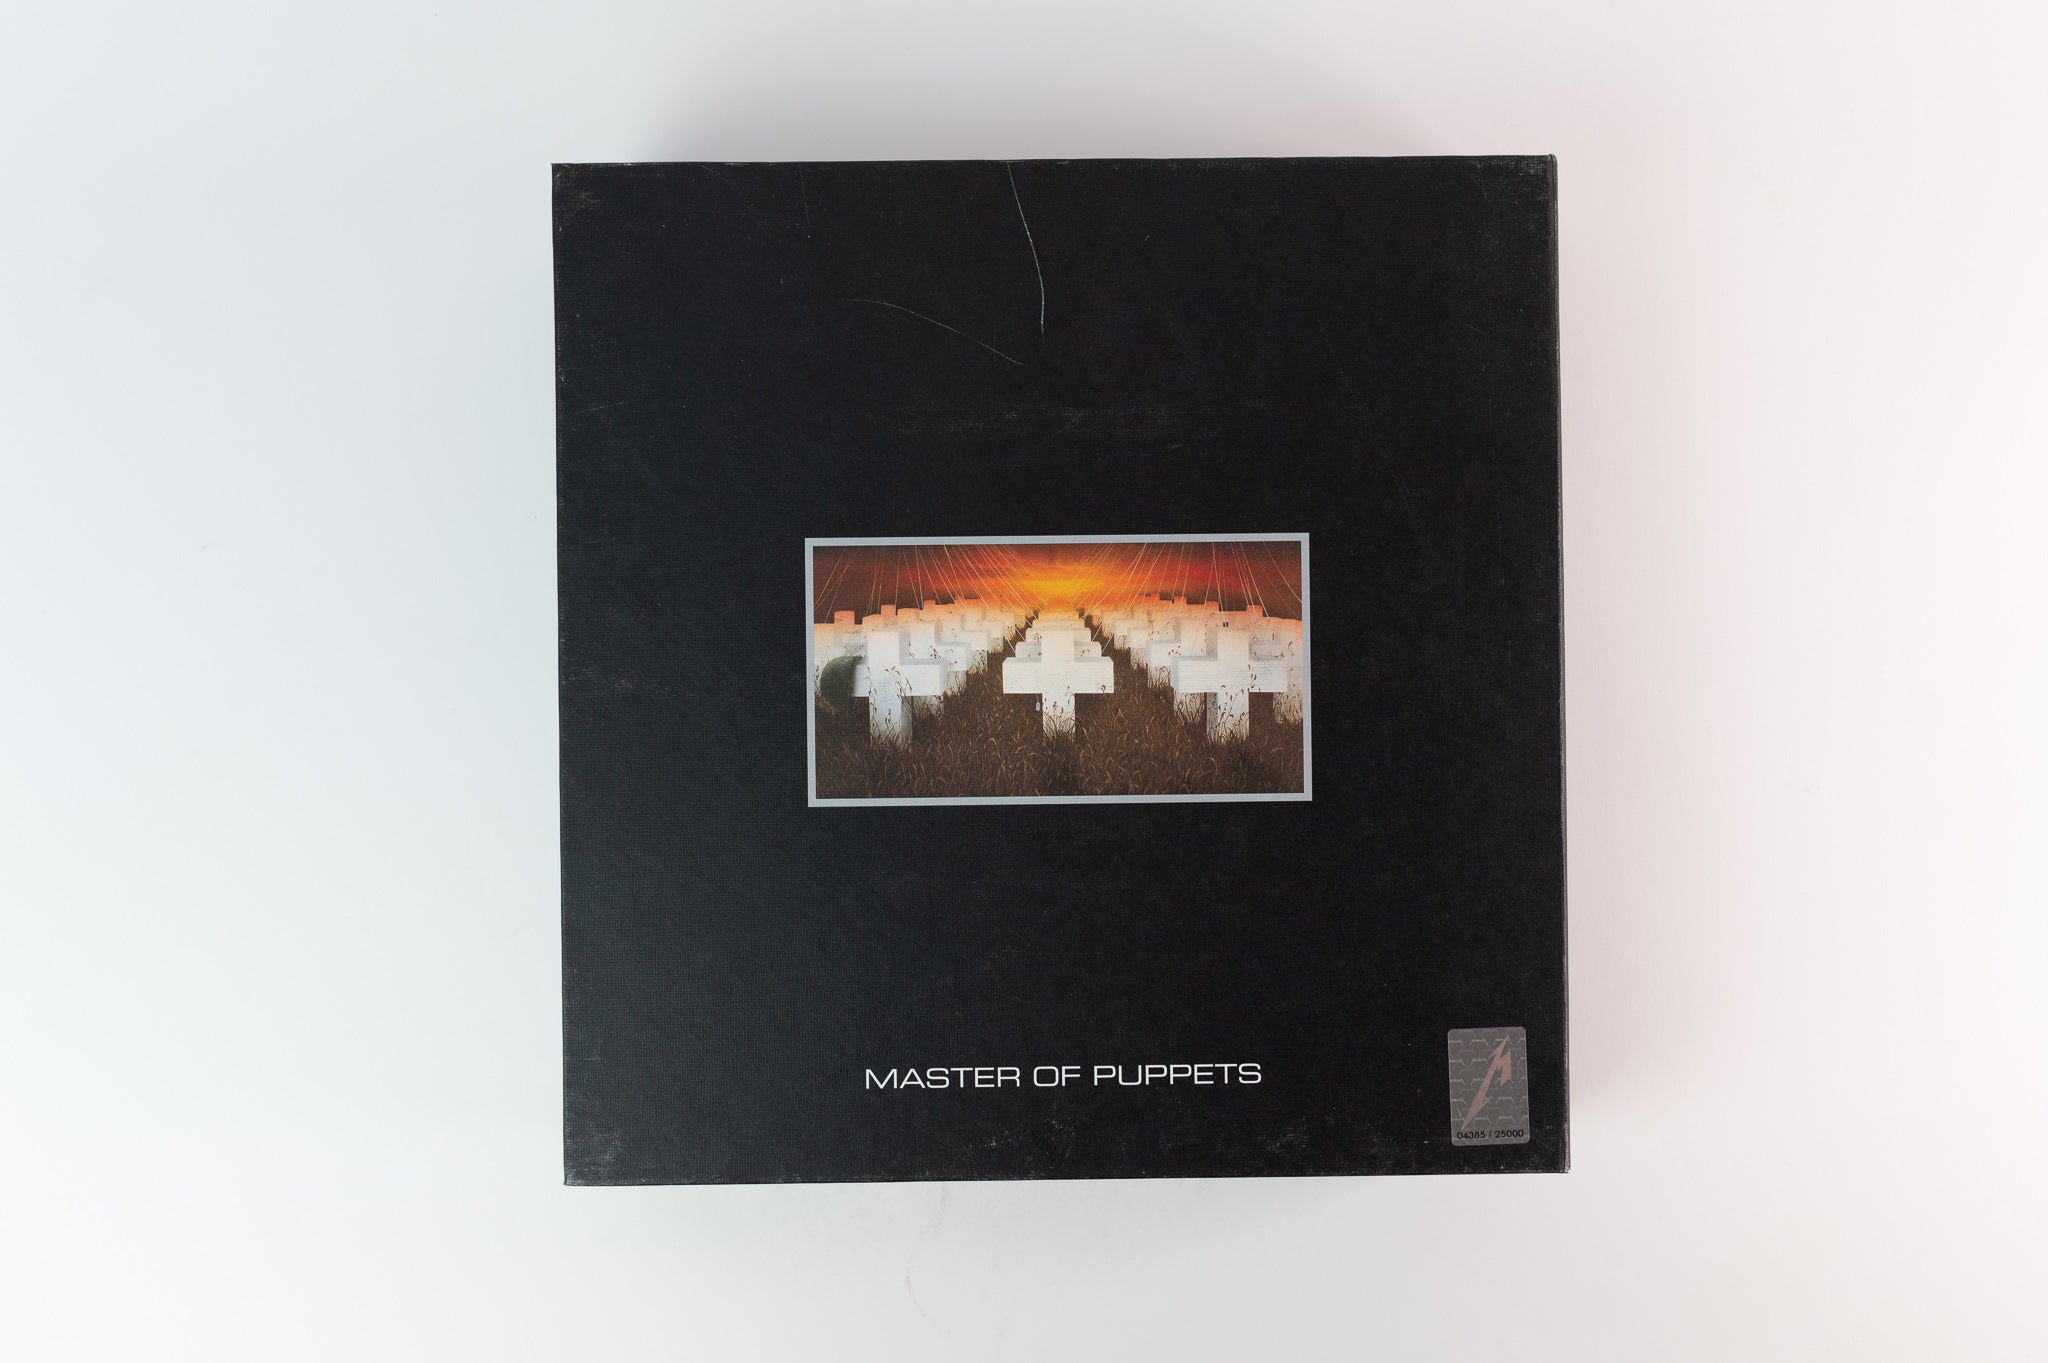 Metallica - Master Of Puppets on Blackened Limited Edition Deluxe Numbered Reissue Box Set